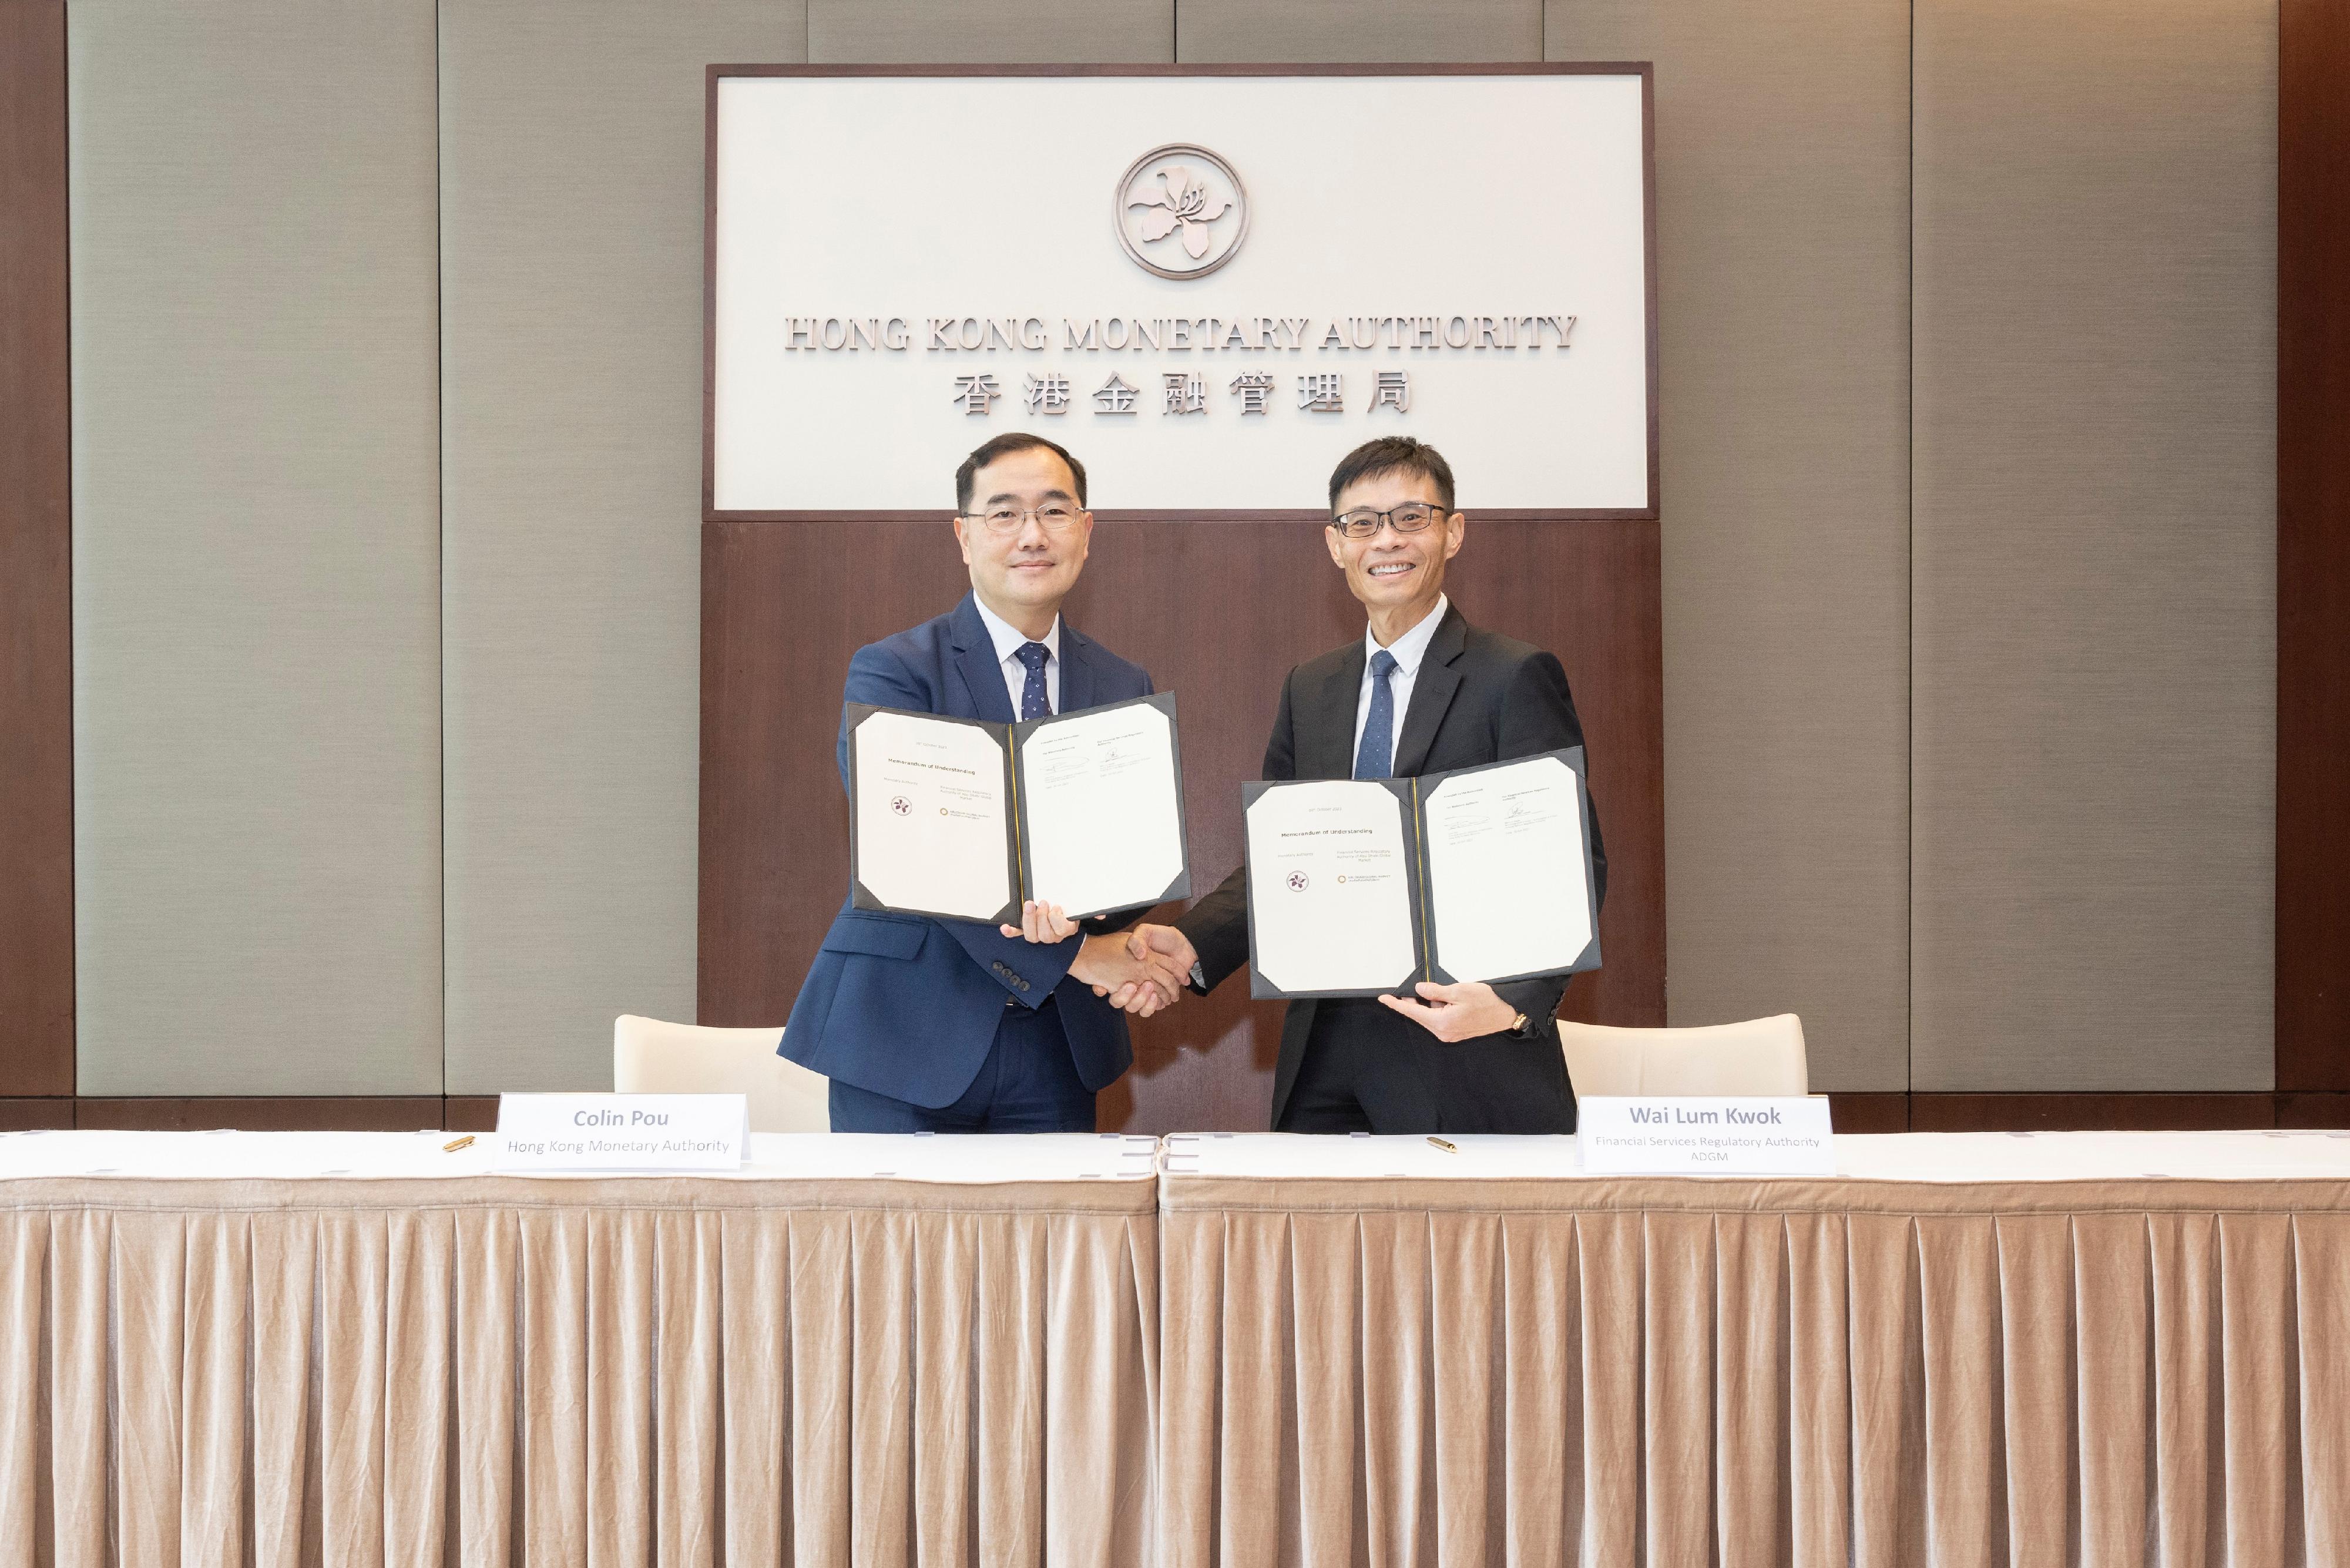 The Hong Kong Monetary Authority (HKMA) and the Financial Services Regulatory Authority (FSRA) of the Abu Dhabi Global Market (ADGM) jointly announced today (November 22) the exchange of a Memorandum of Understanding (MoU) to deepen the ongoing partnership on fintech between the two authorities. Photo shows the Executive Director (Financial Infrastructure) of the HKMA, Mr Colin Pou (left), and the Senior Executive Director - Authorisation & Fintech of the FSRA, Mr Kwok Wai-lum (right), sign and exchange the MoU in Hong Kong.